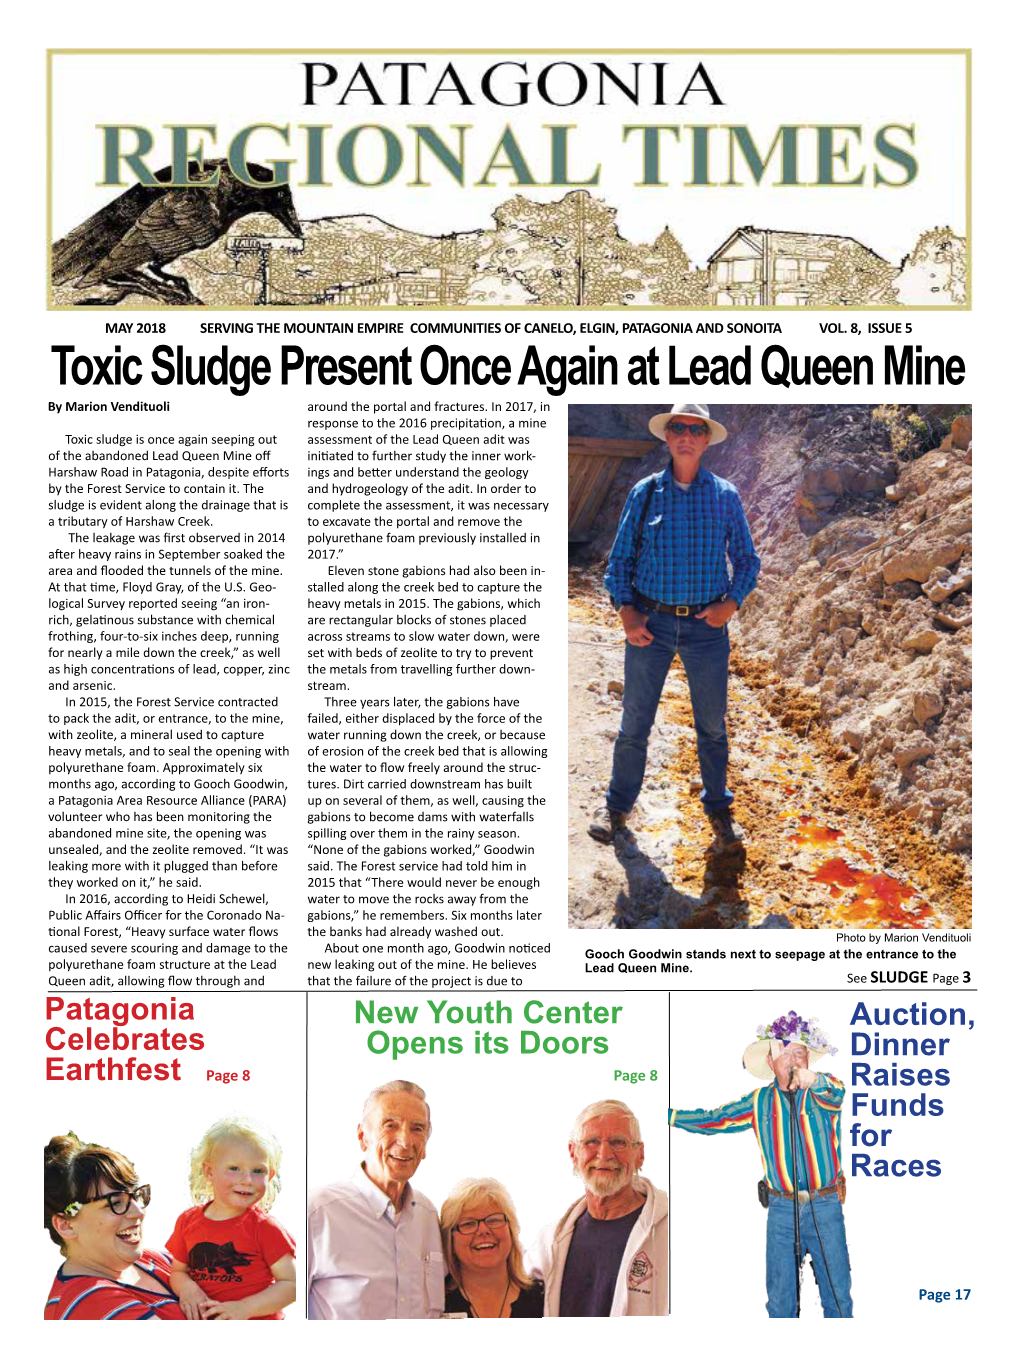 Toxic Sludge Present Once Again at Lead Queen Mine by Marion Vendituoli Around the Portal and Fractures